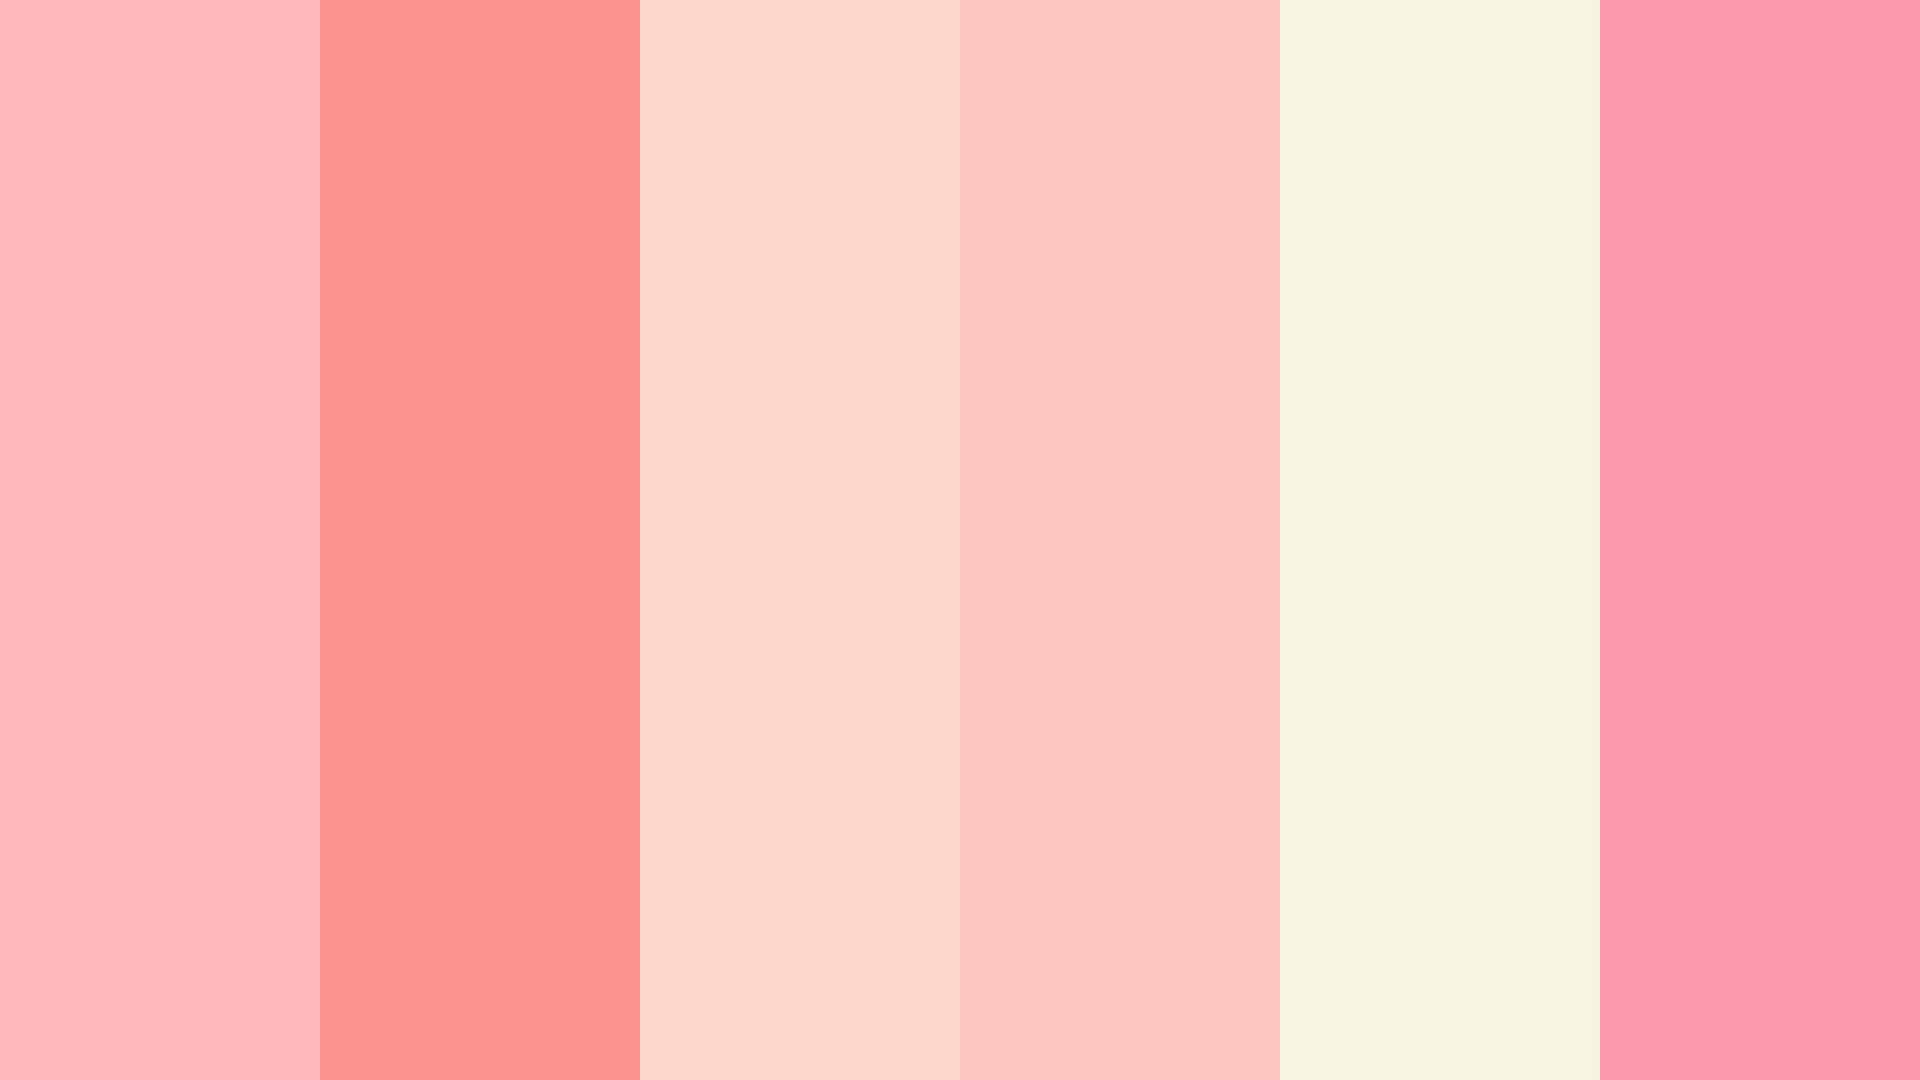 A color palette with a light pink, dark pink, and white color scheme. - Soft pink